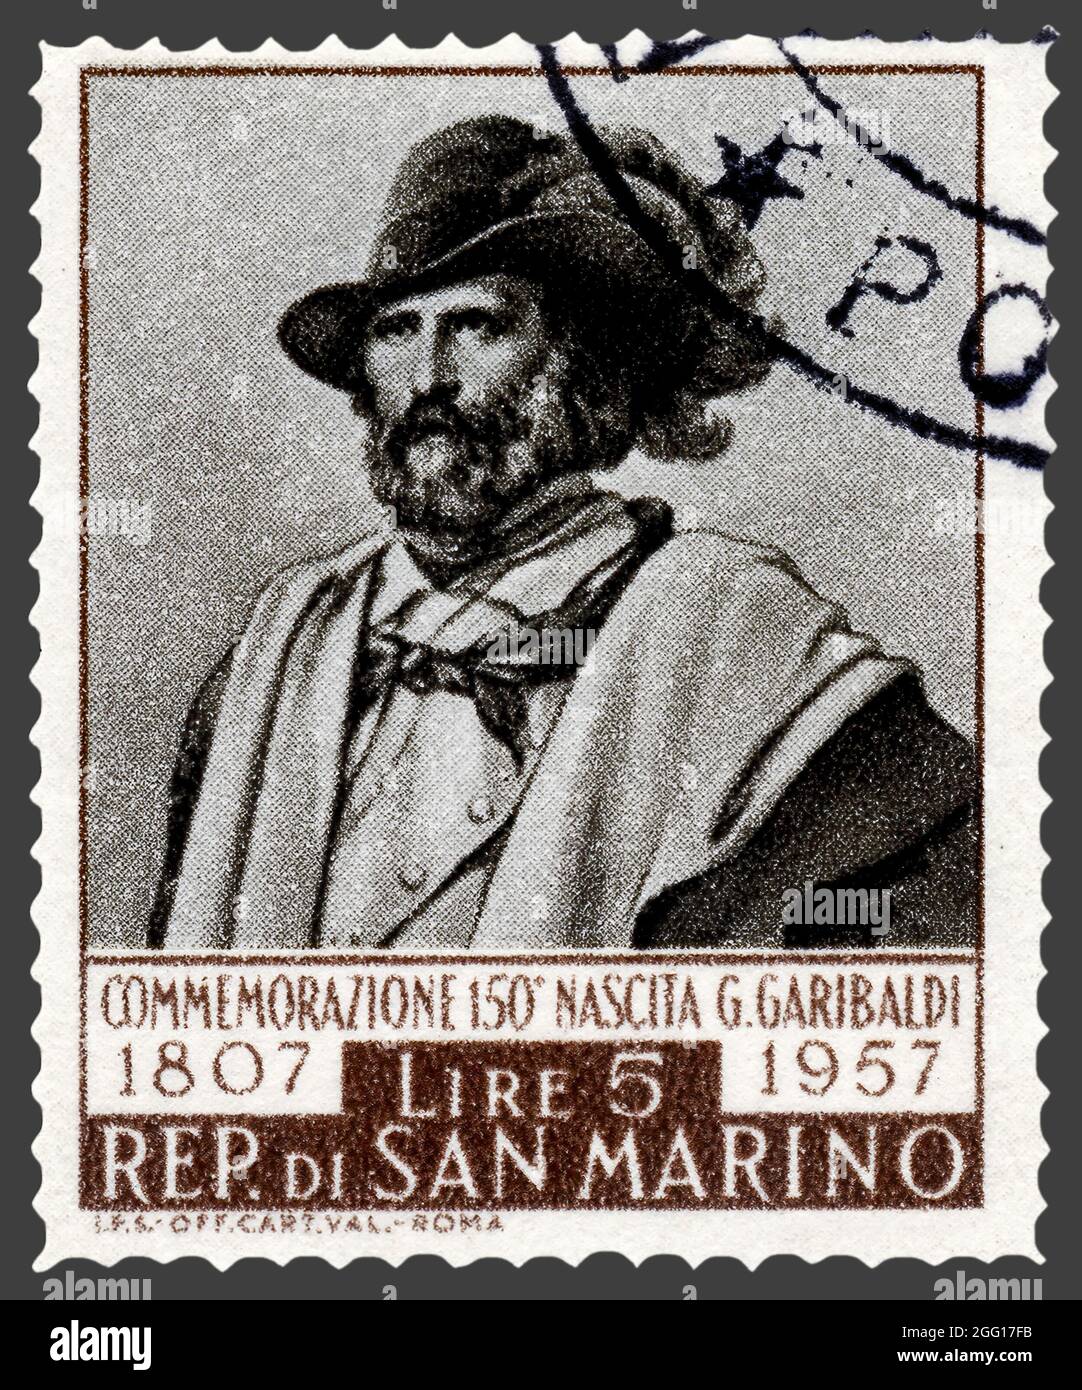 San Marino postage stamp depicting well dressed Italian hero Giuseppe Garibaldi wearing a feathered hat with a black ostrich feather. Stock Photo